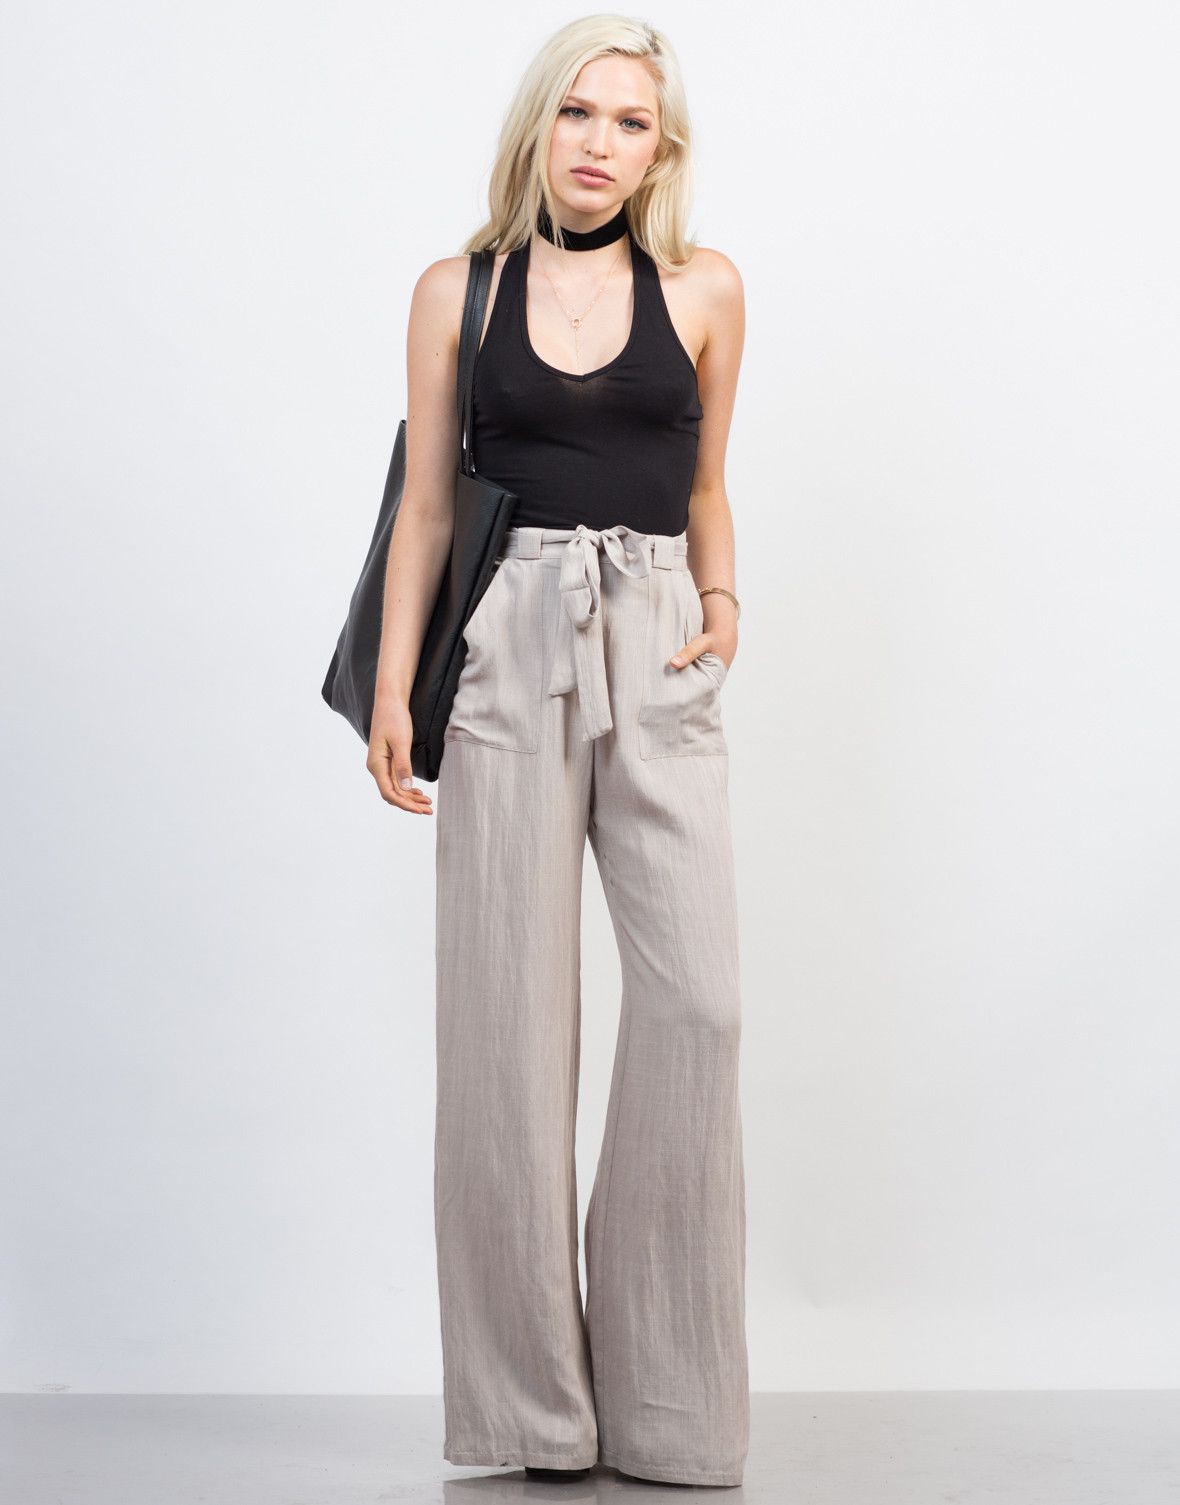 Stylish Flare Palazzo Pants For Girls Linen Palazzo Pants: party outfits,  Classy Palazzo Ideas,  Palazzo Attire,  Palazzo Flared Pants,  Palazzo Cotton,  Linen Trousers  